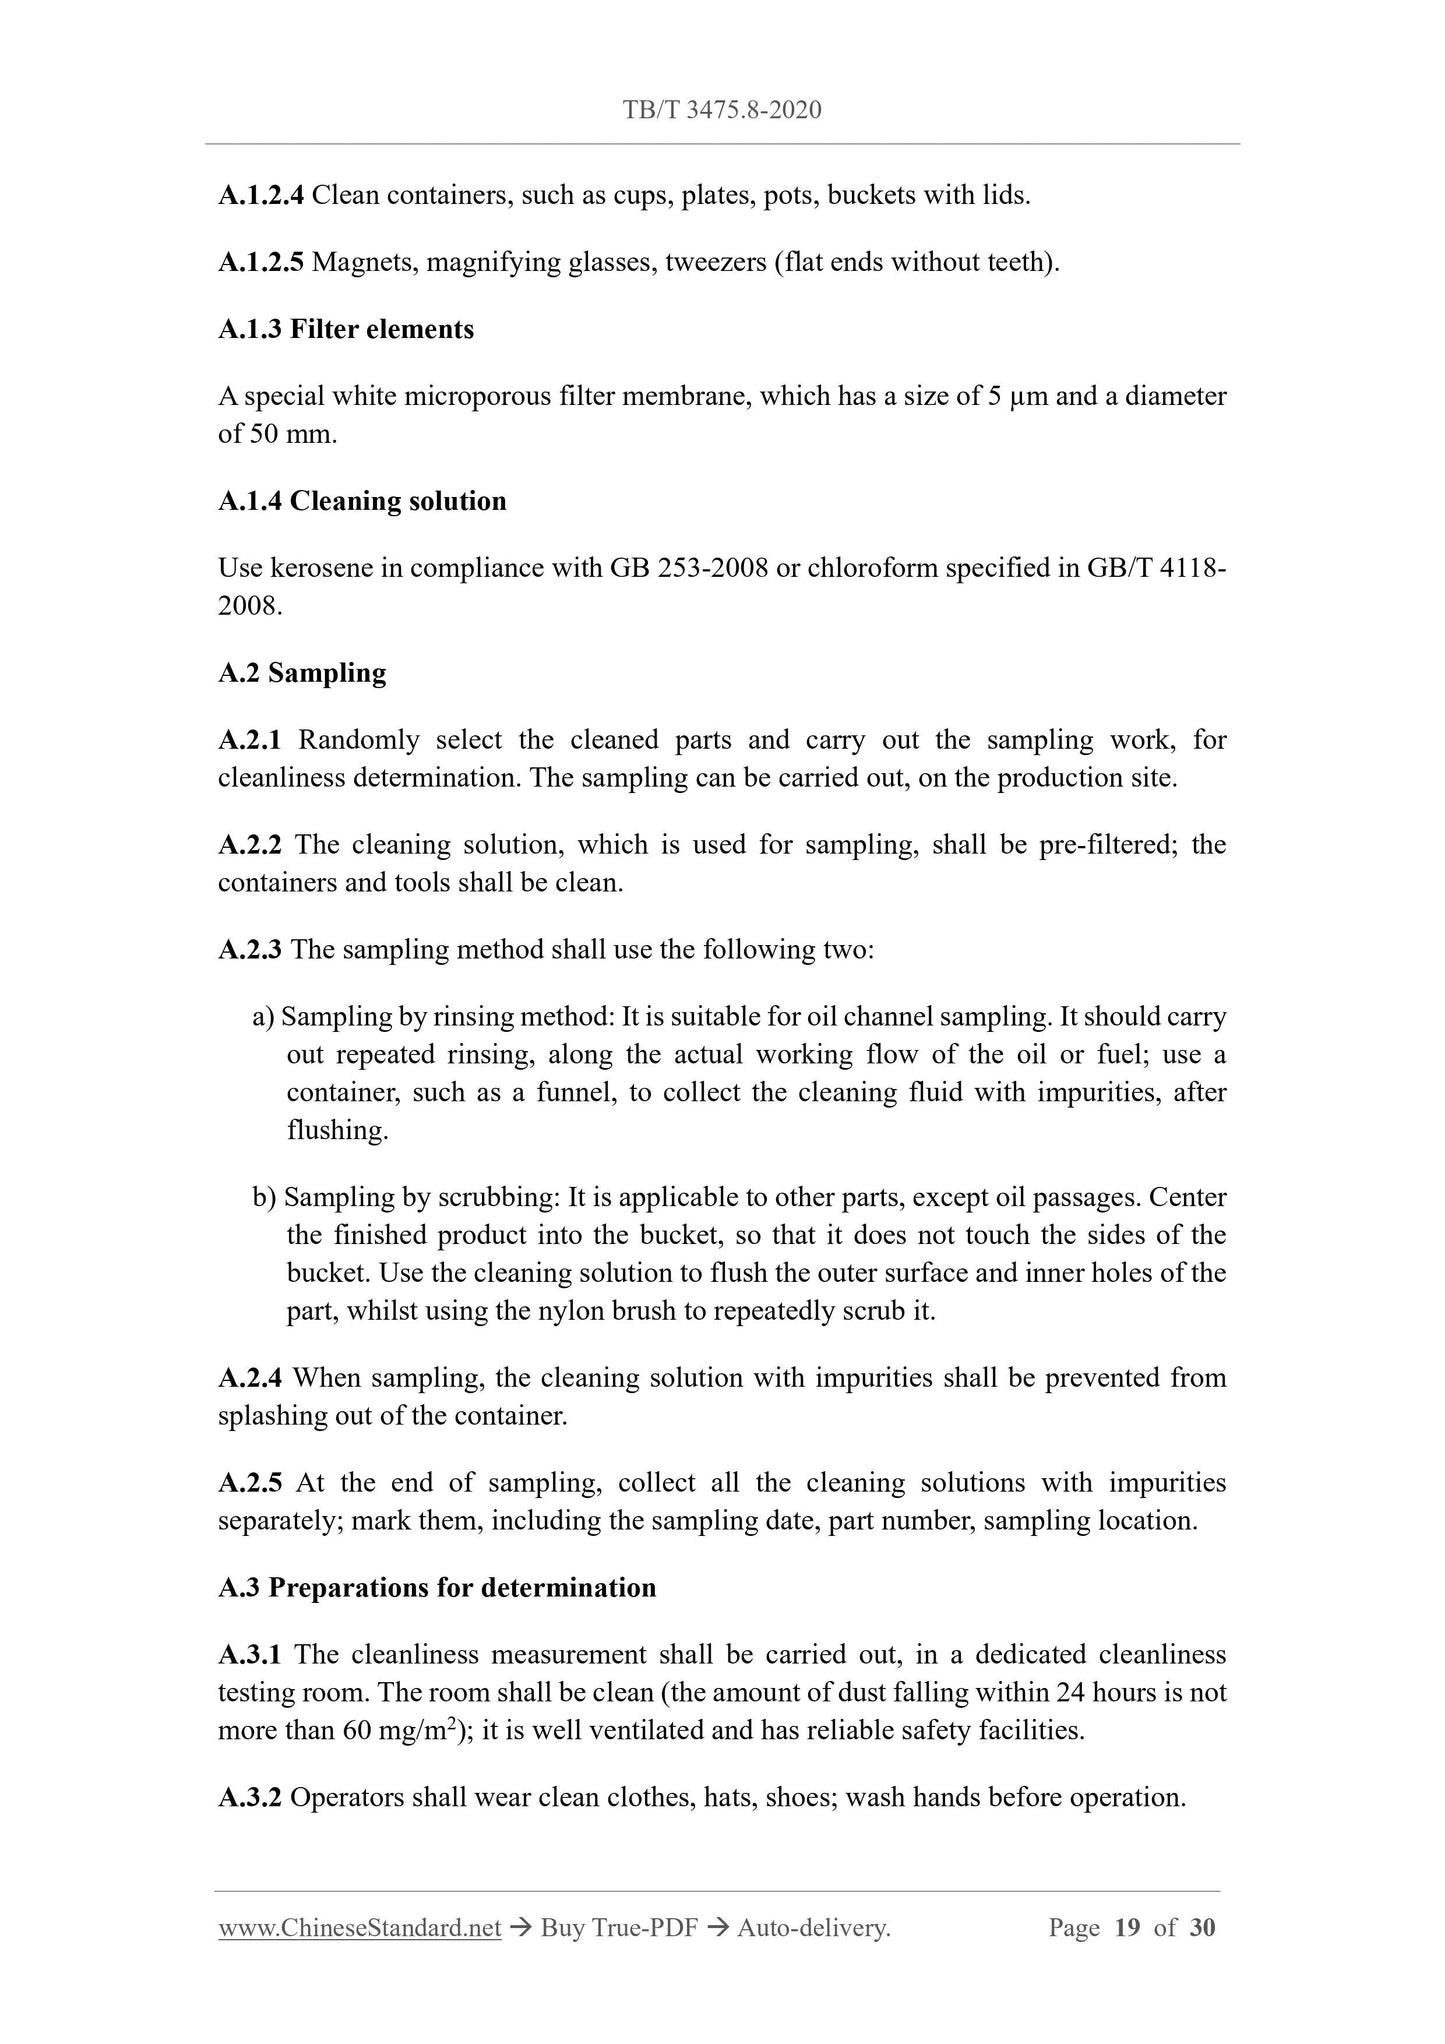 TB/T 3475.8-2020 Page 10